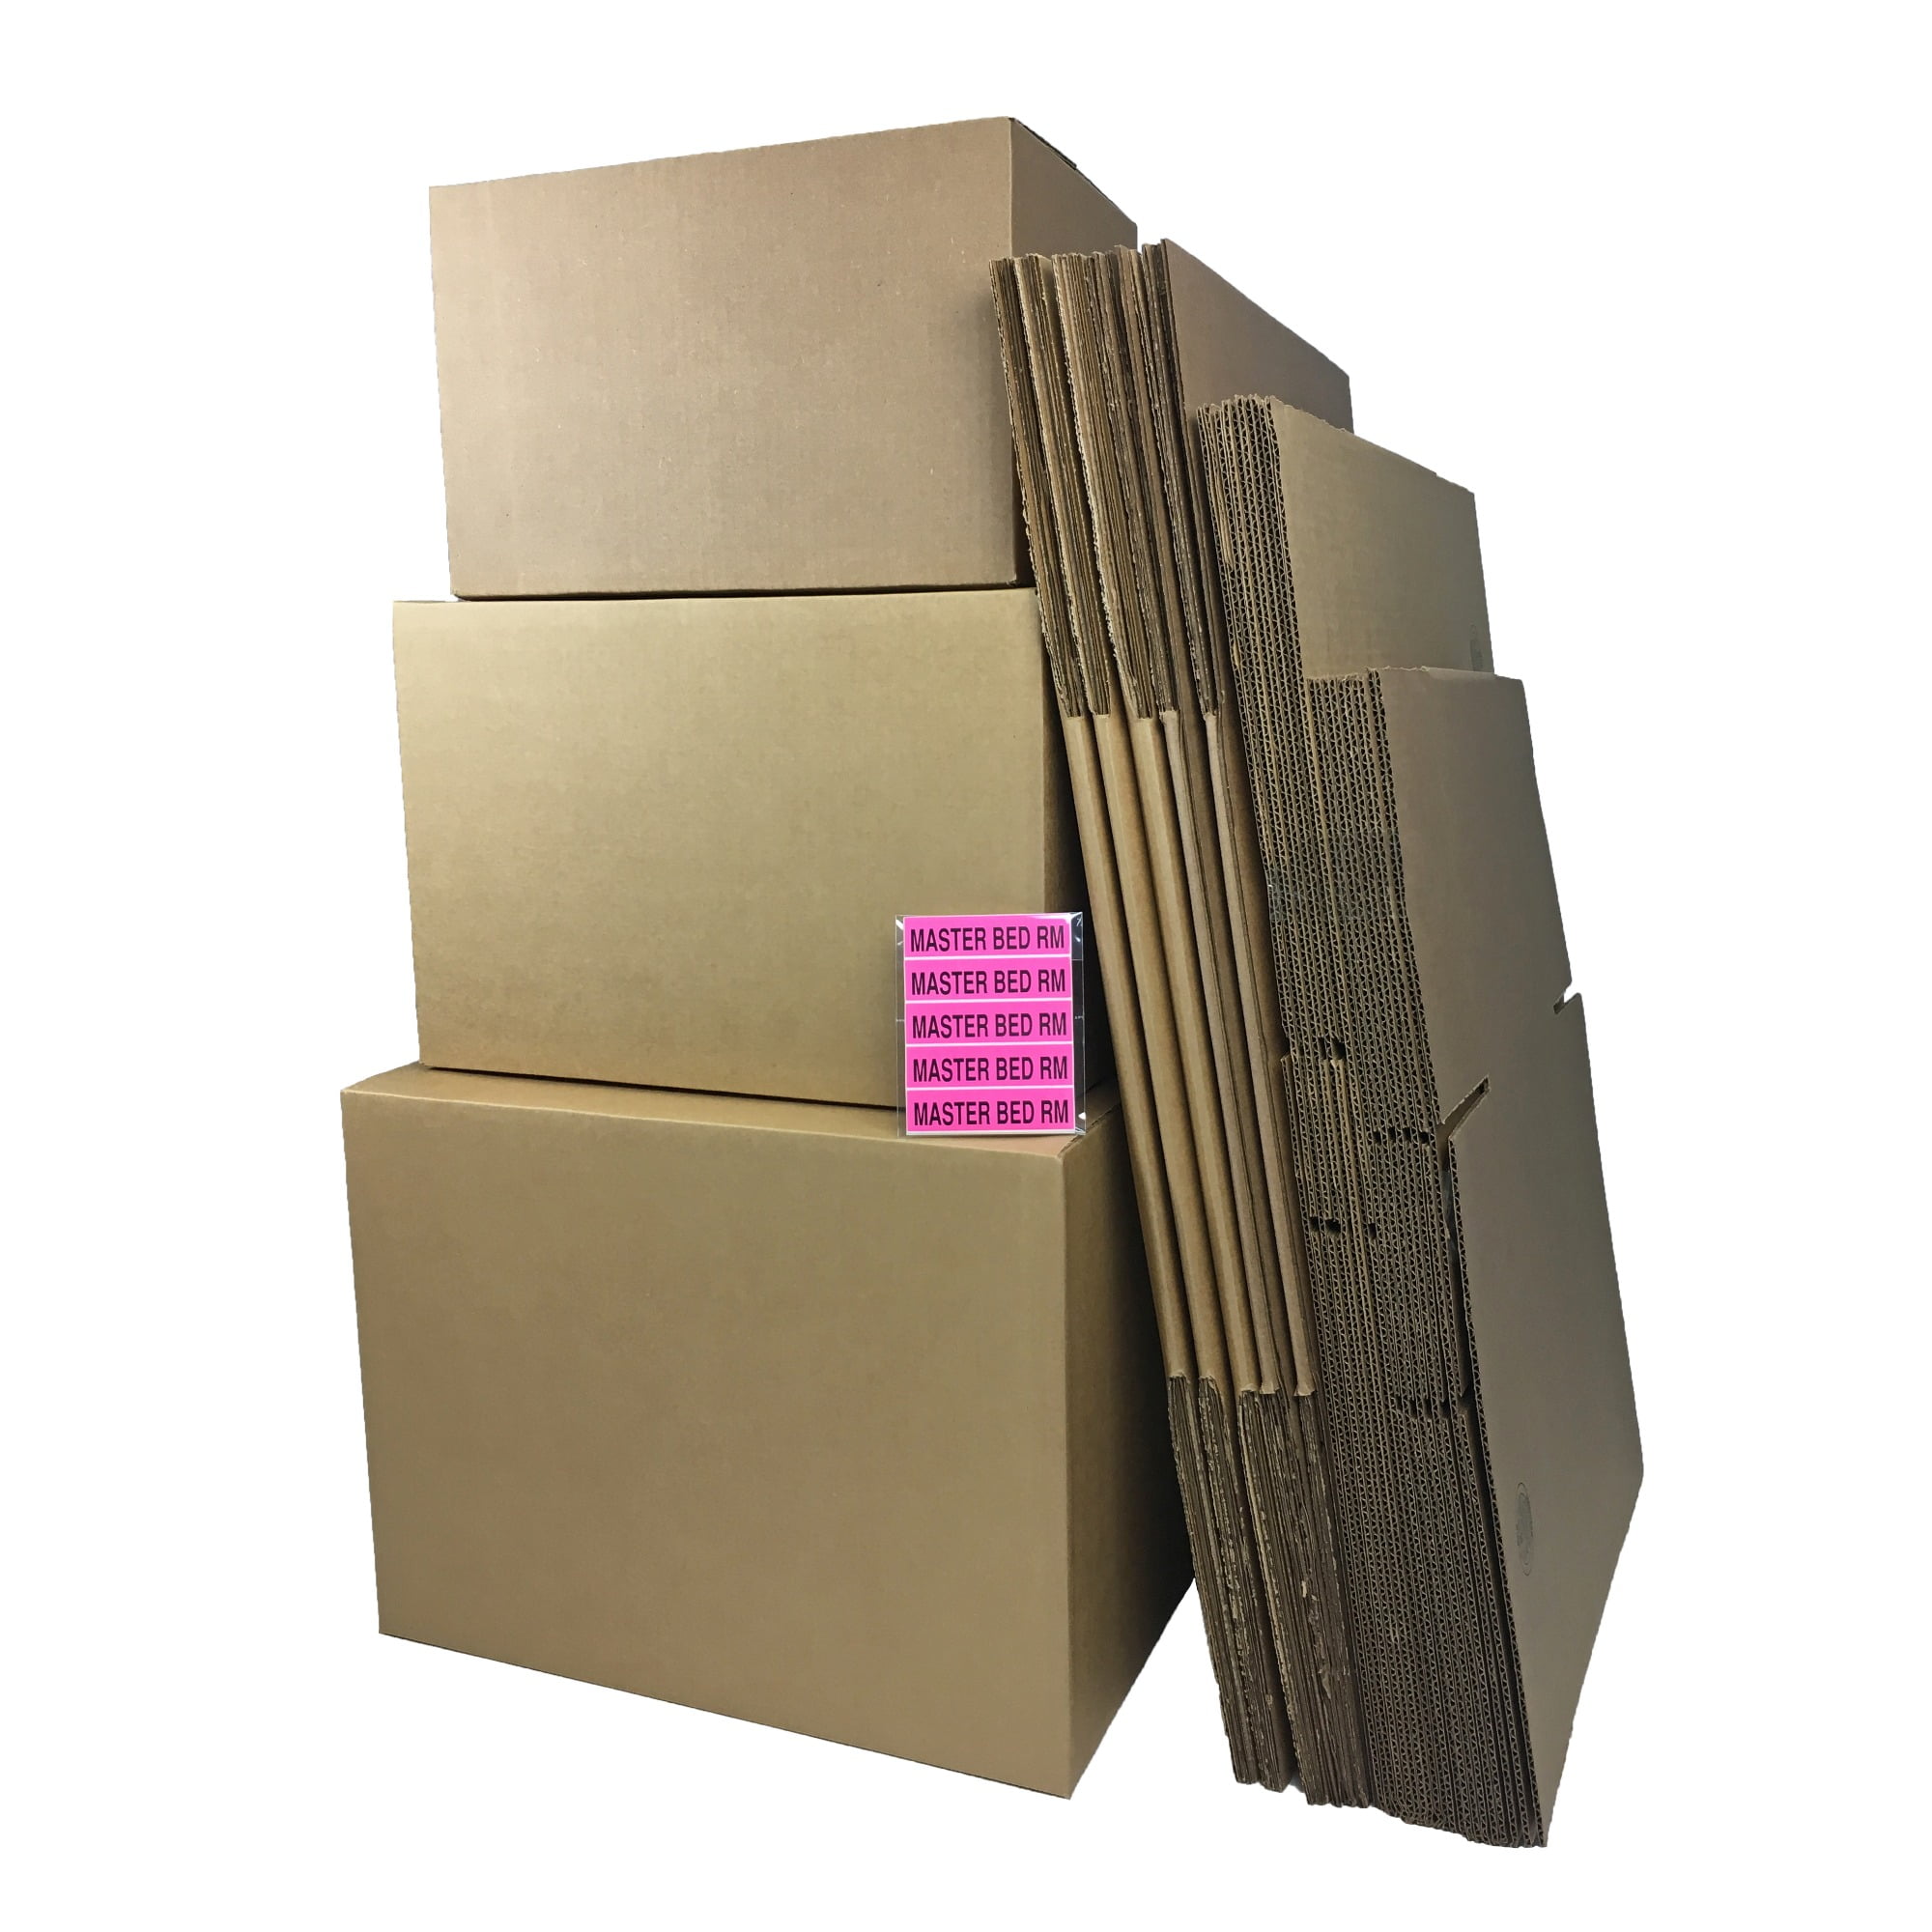 Moving supplies: 3-4 Bedroom Household Kit®